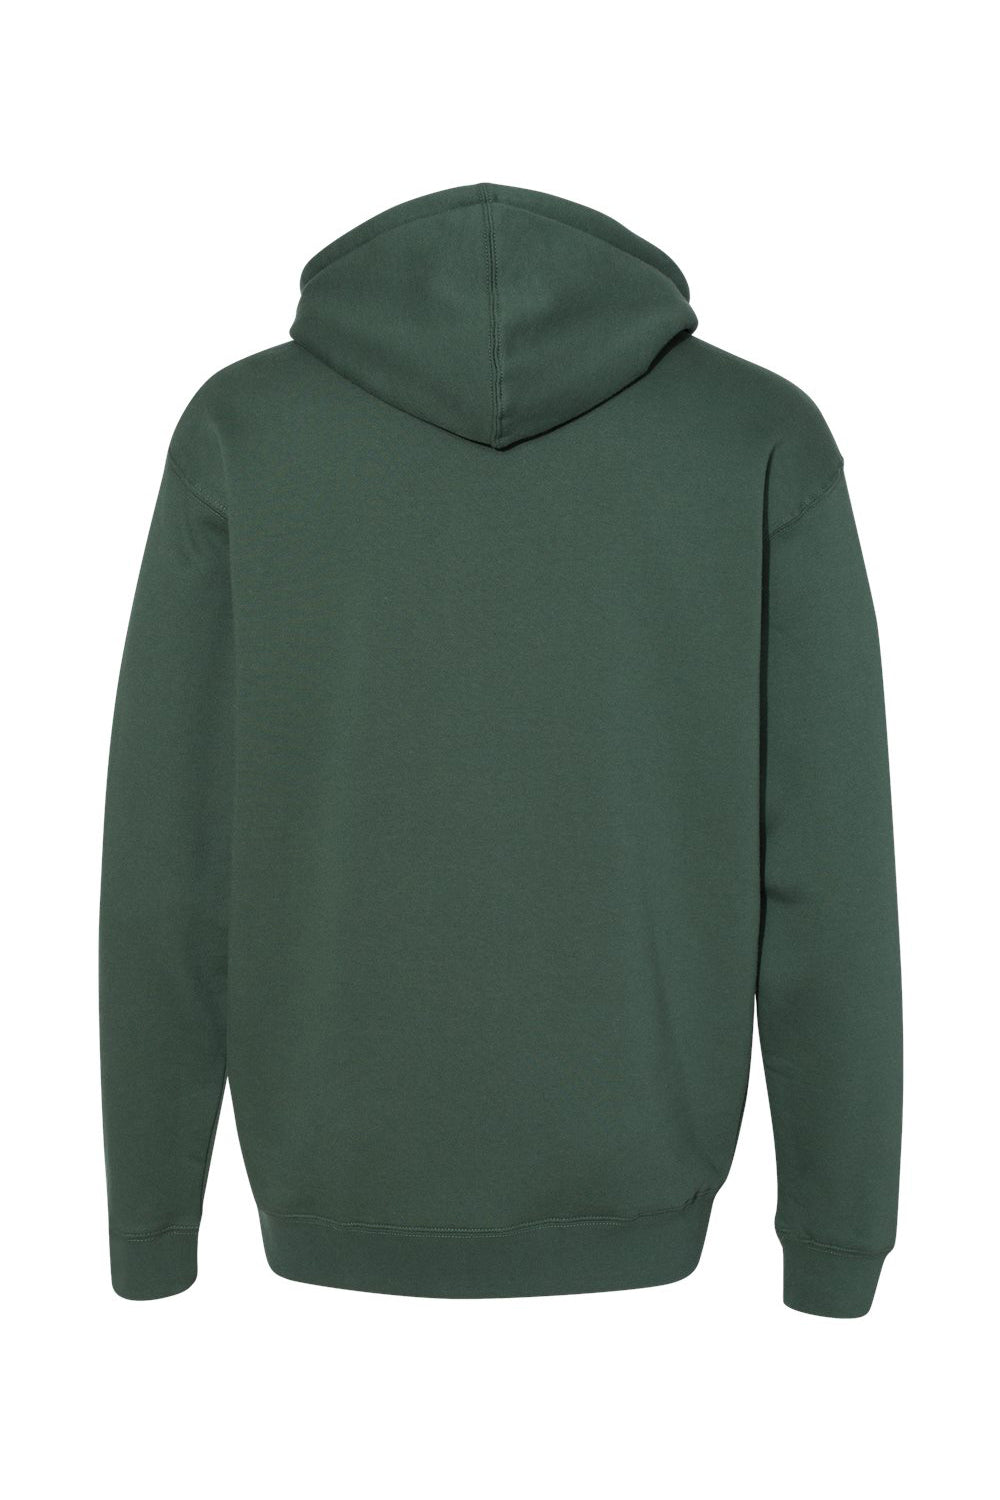 Independent Trading Co. IND4000 Mens Hooded Sweatshirt Hoodie Alpine Green Flat Back